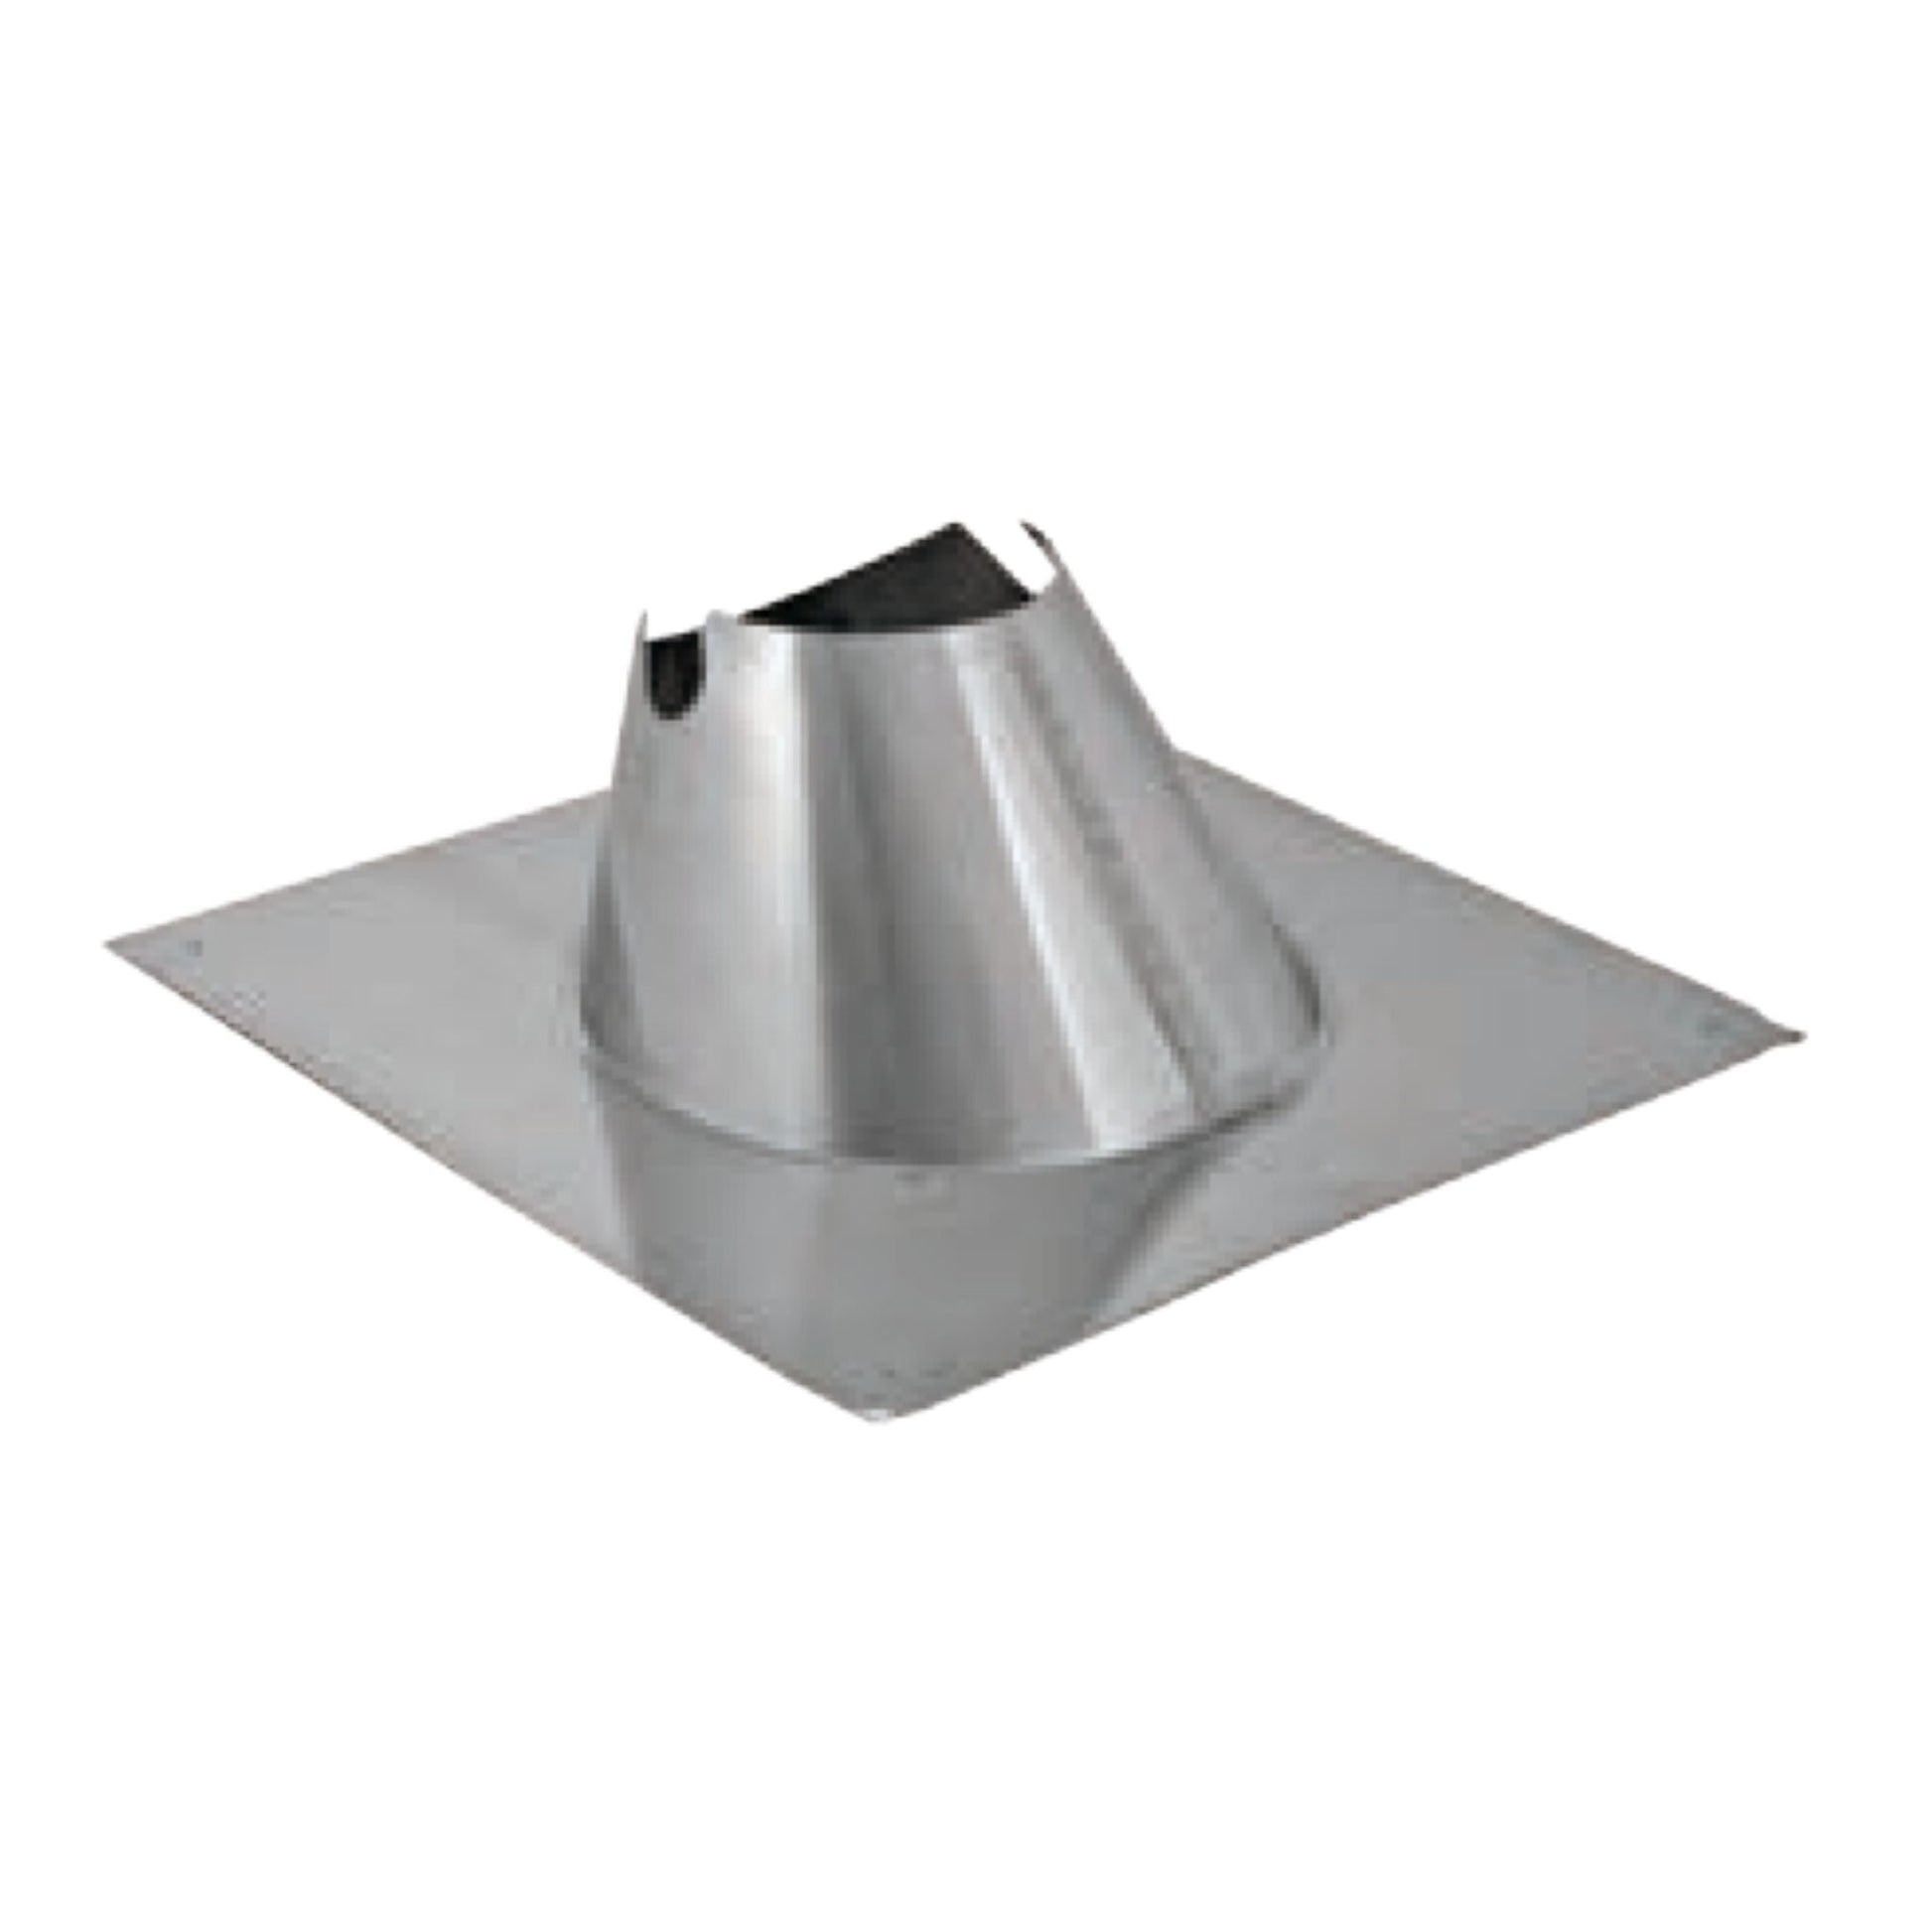 DuraVent FasNSeal 9" 29-4C Stainless Steel Variable Pitch Roof Flashing